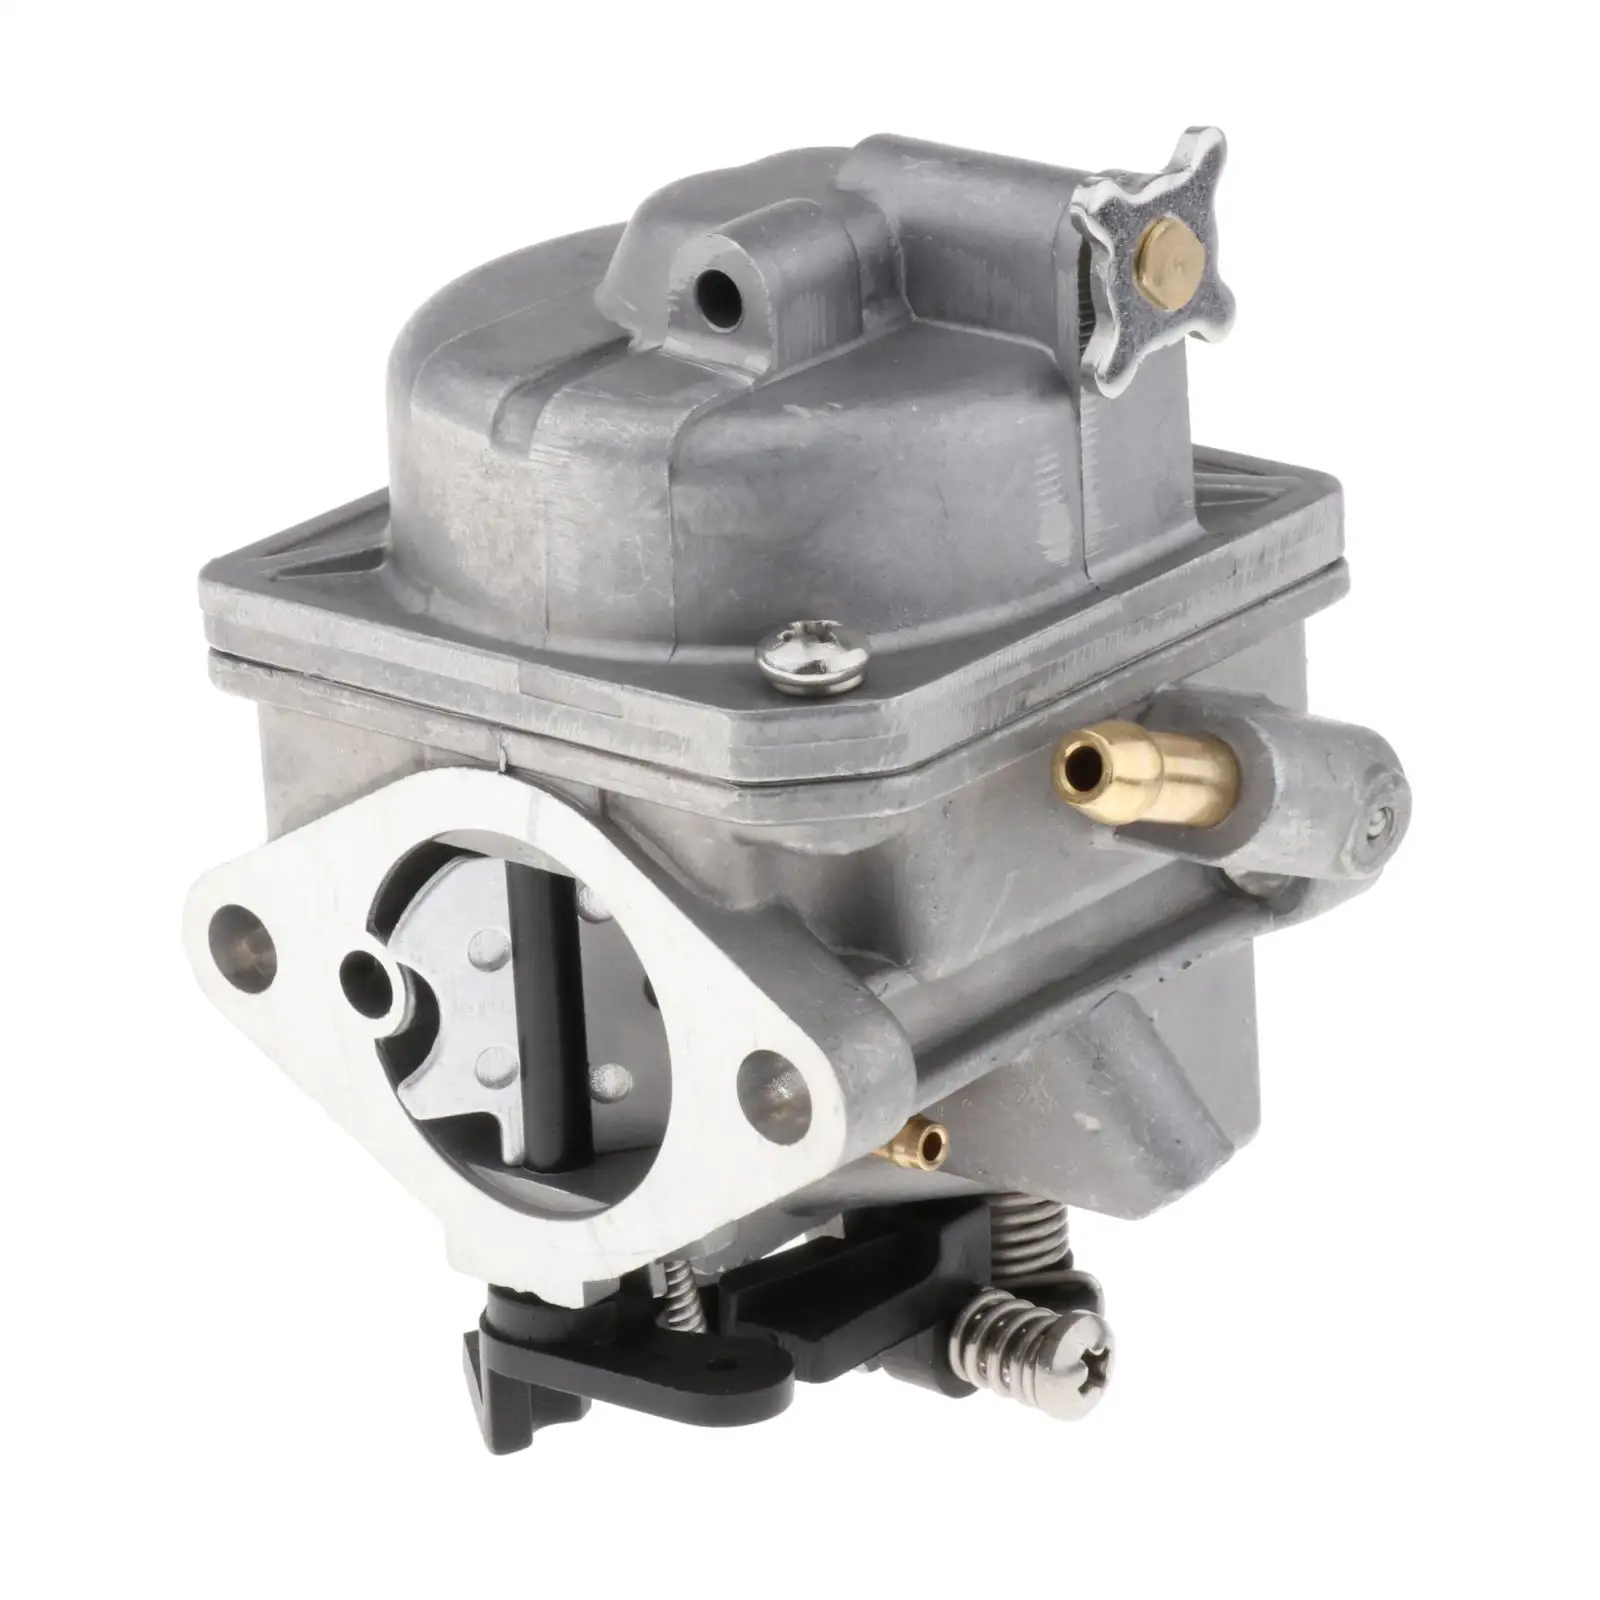 Boat Motor Outboard Engine Premium Quality 16100-ZV1-A00 Carburetor Carb Assy for Honda BC05B BF 5 HP